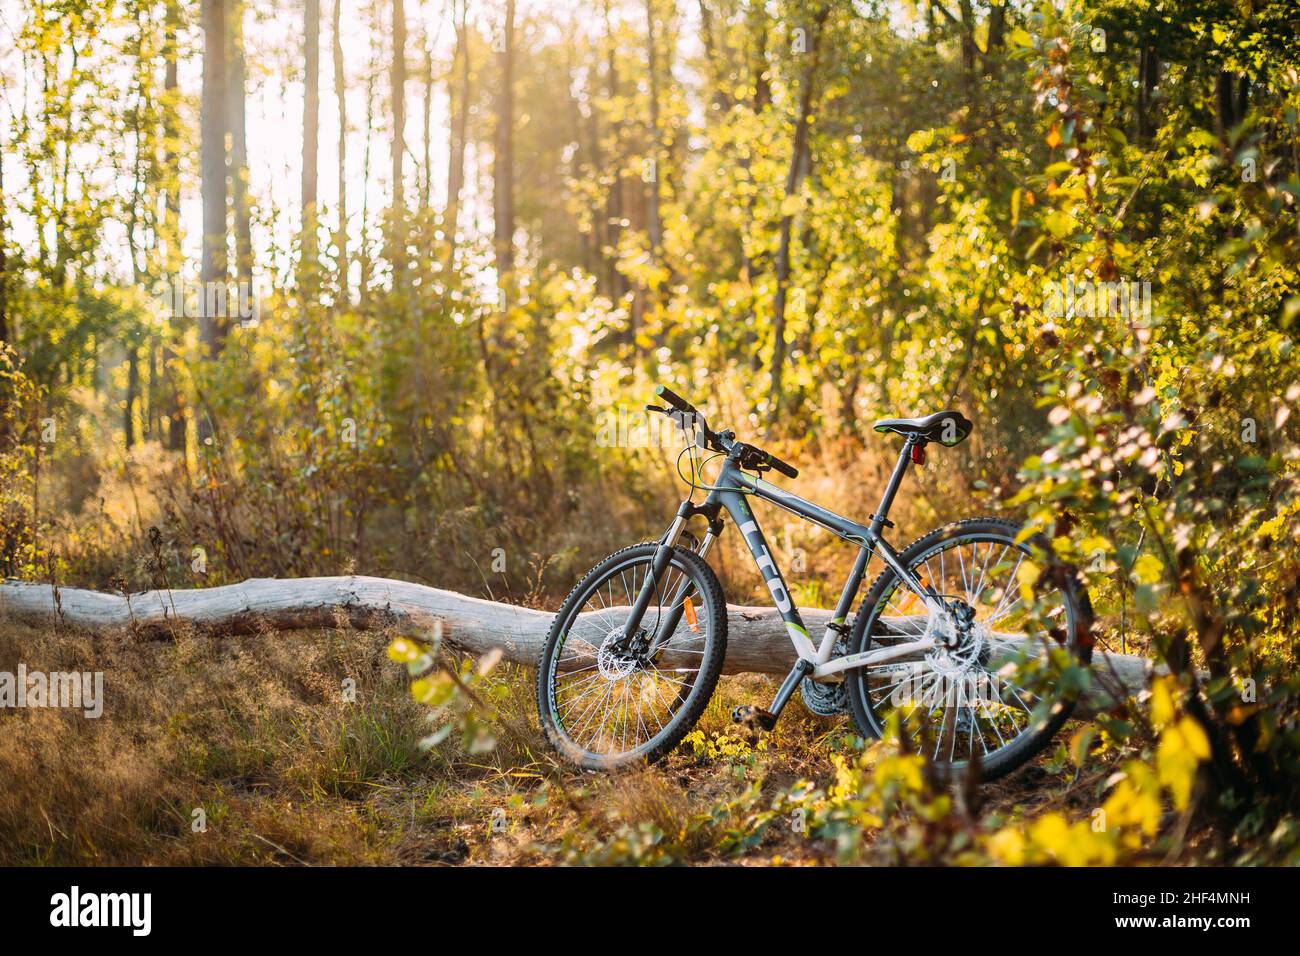 Mountain bike bicycle brand LTD is an old fallen tree in autumn forest on a sunny day Stock Photo